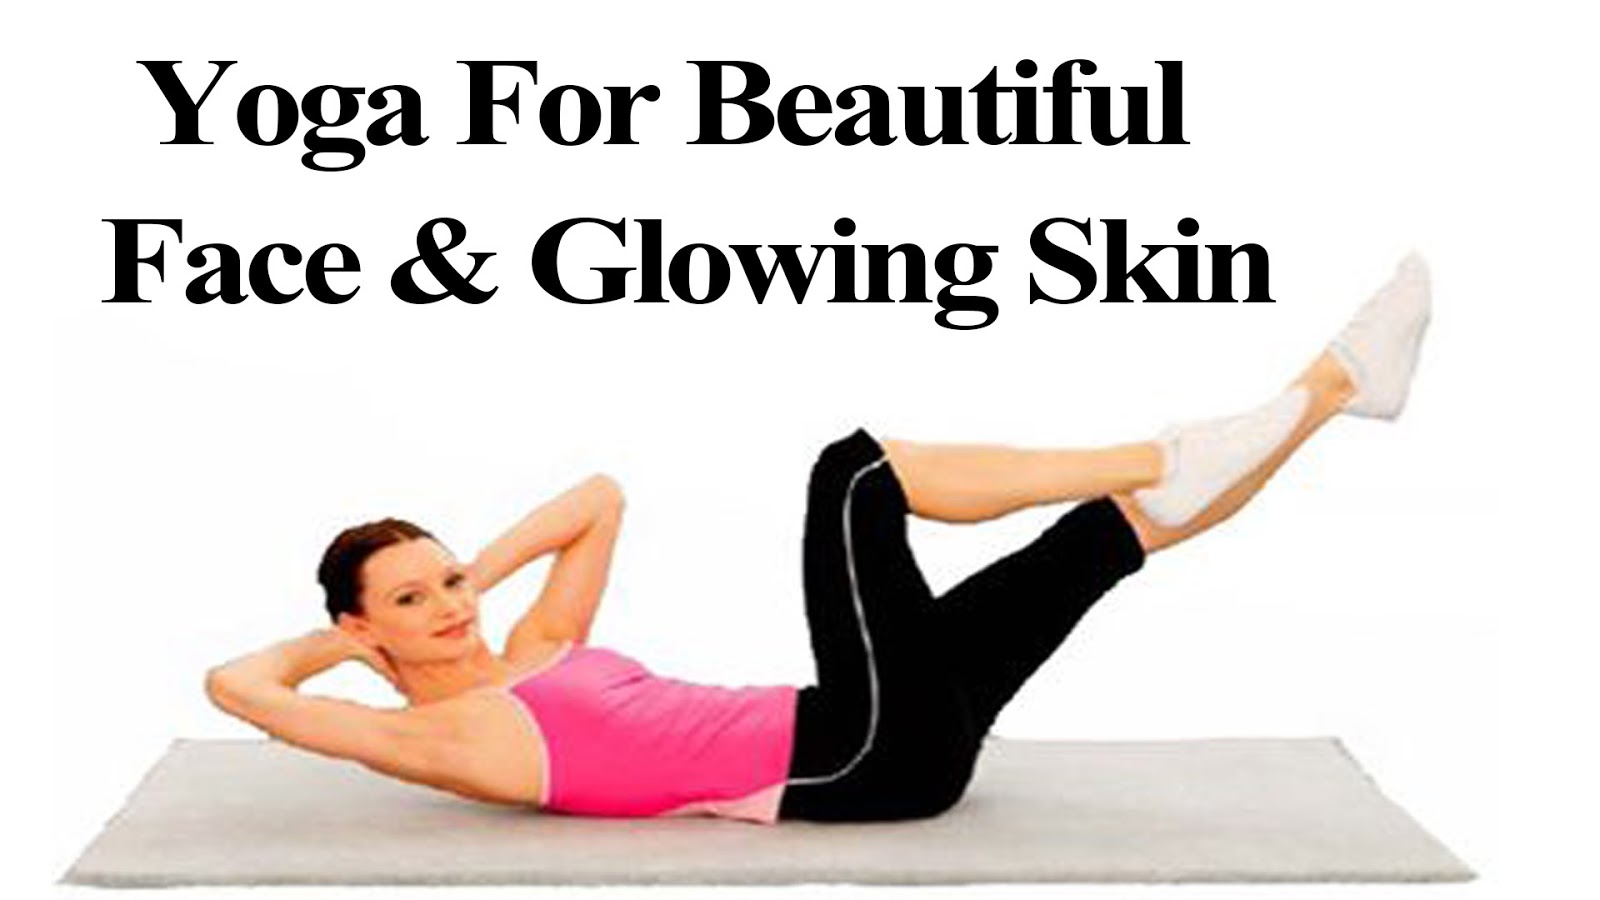 Yoga Exercises For Shiny Skin 8 Simple Yoga Poses For Glowing pertaining to yoga for weight loss and glowing skin for Home